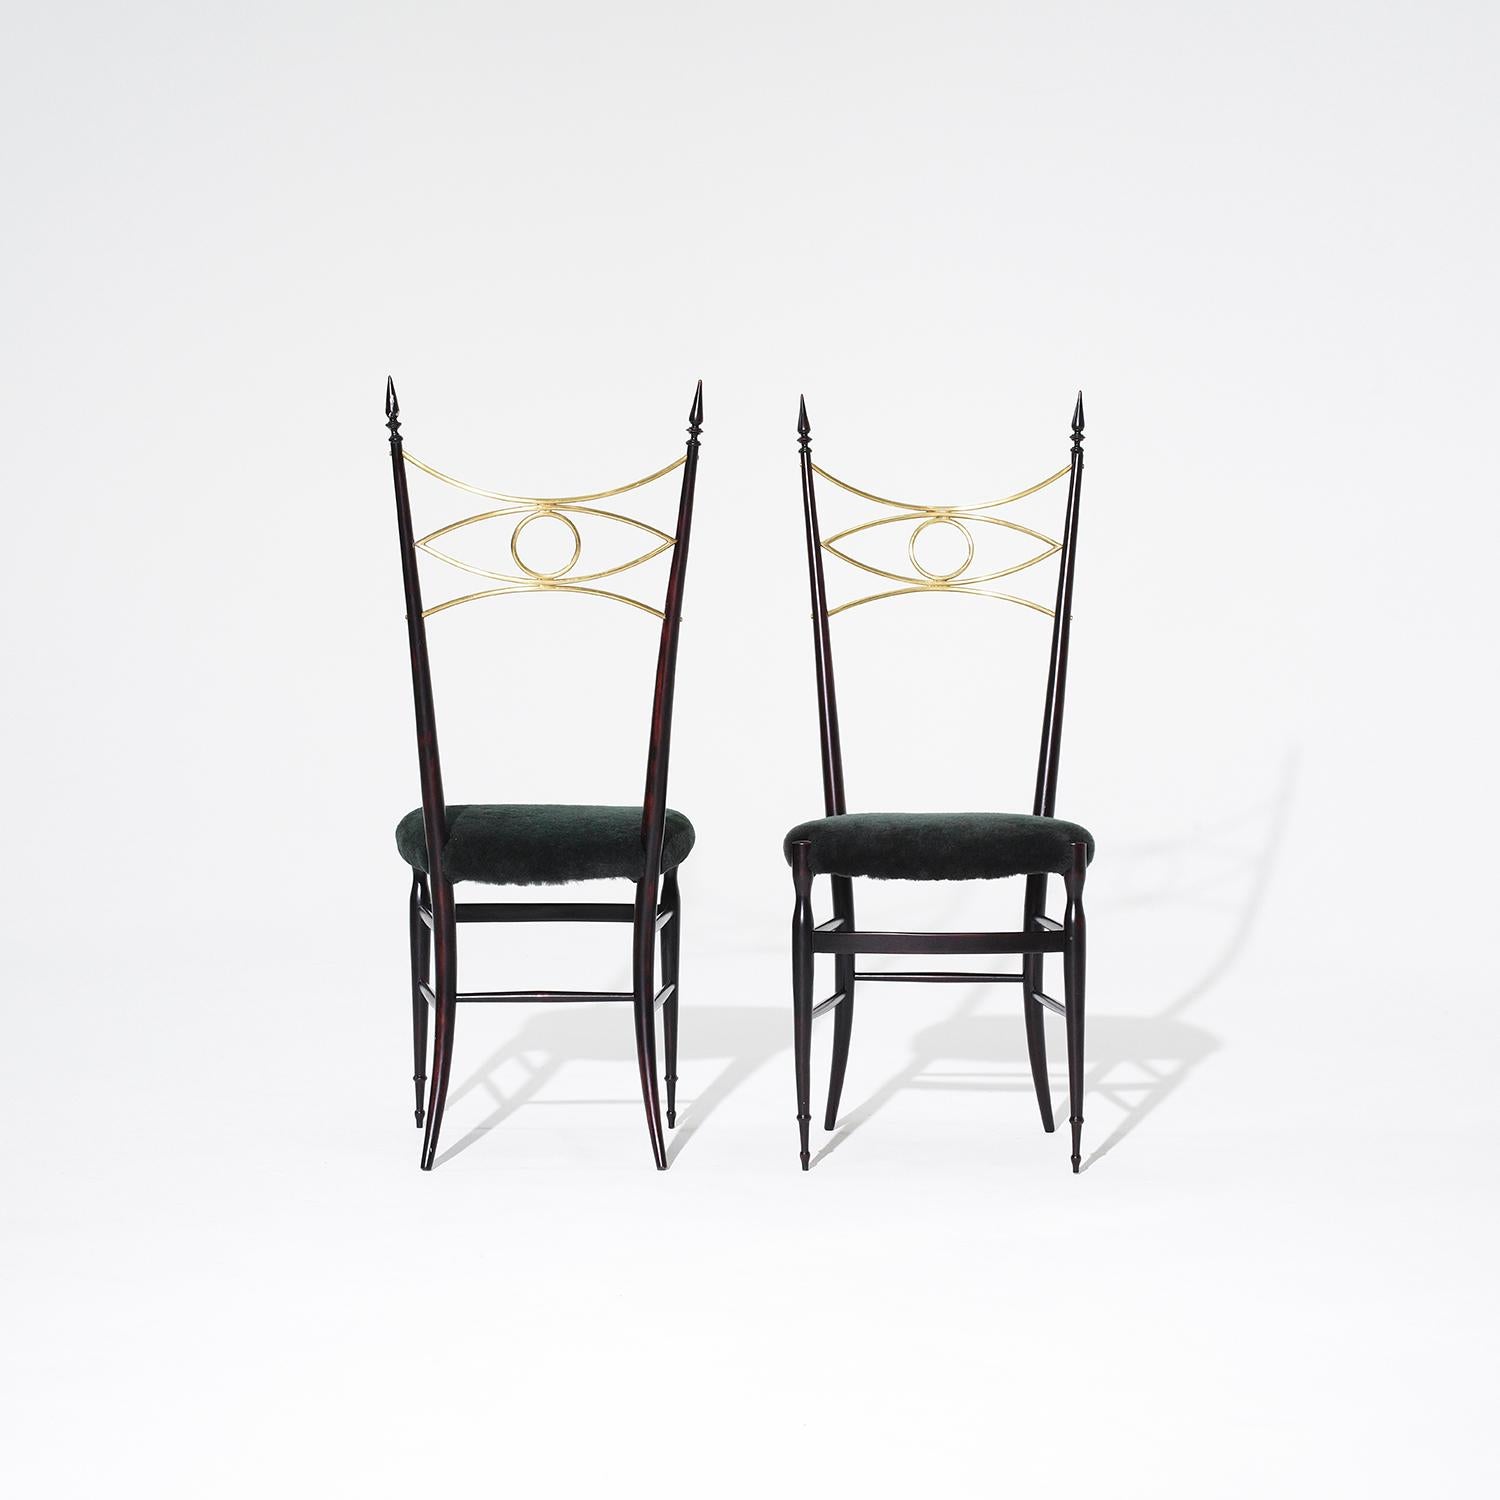 A vintage Mid-Century modern Italian pair of high sculptural side chairs made of hand crafted ebonized Rosewood, designed most likely by Paolo Buffa in good condition. The detailed dining chairs are particularized with an eye-shaped brass bracing